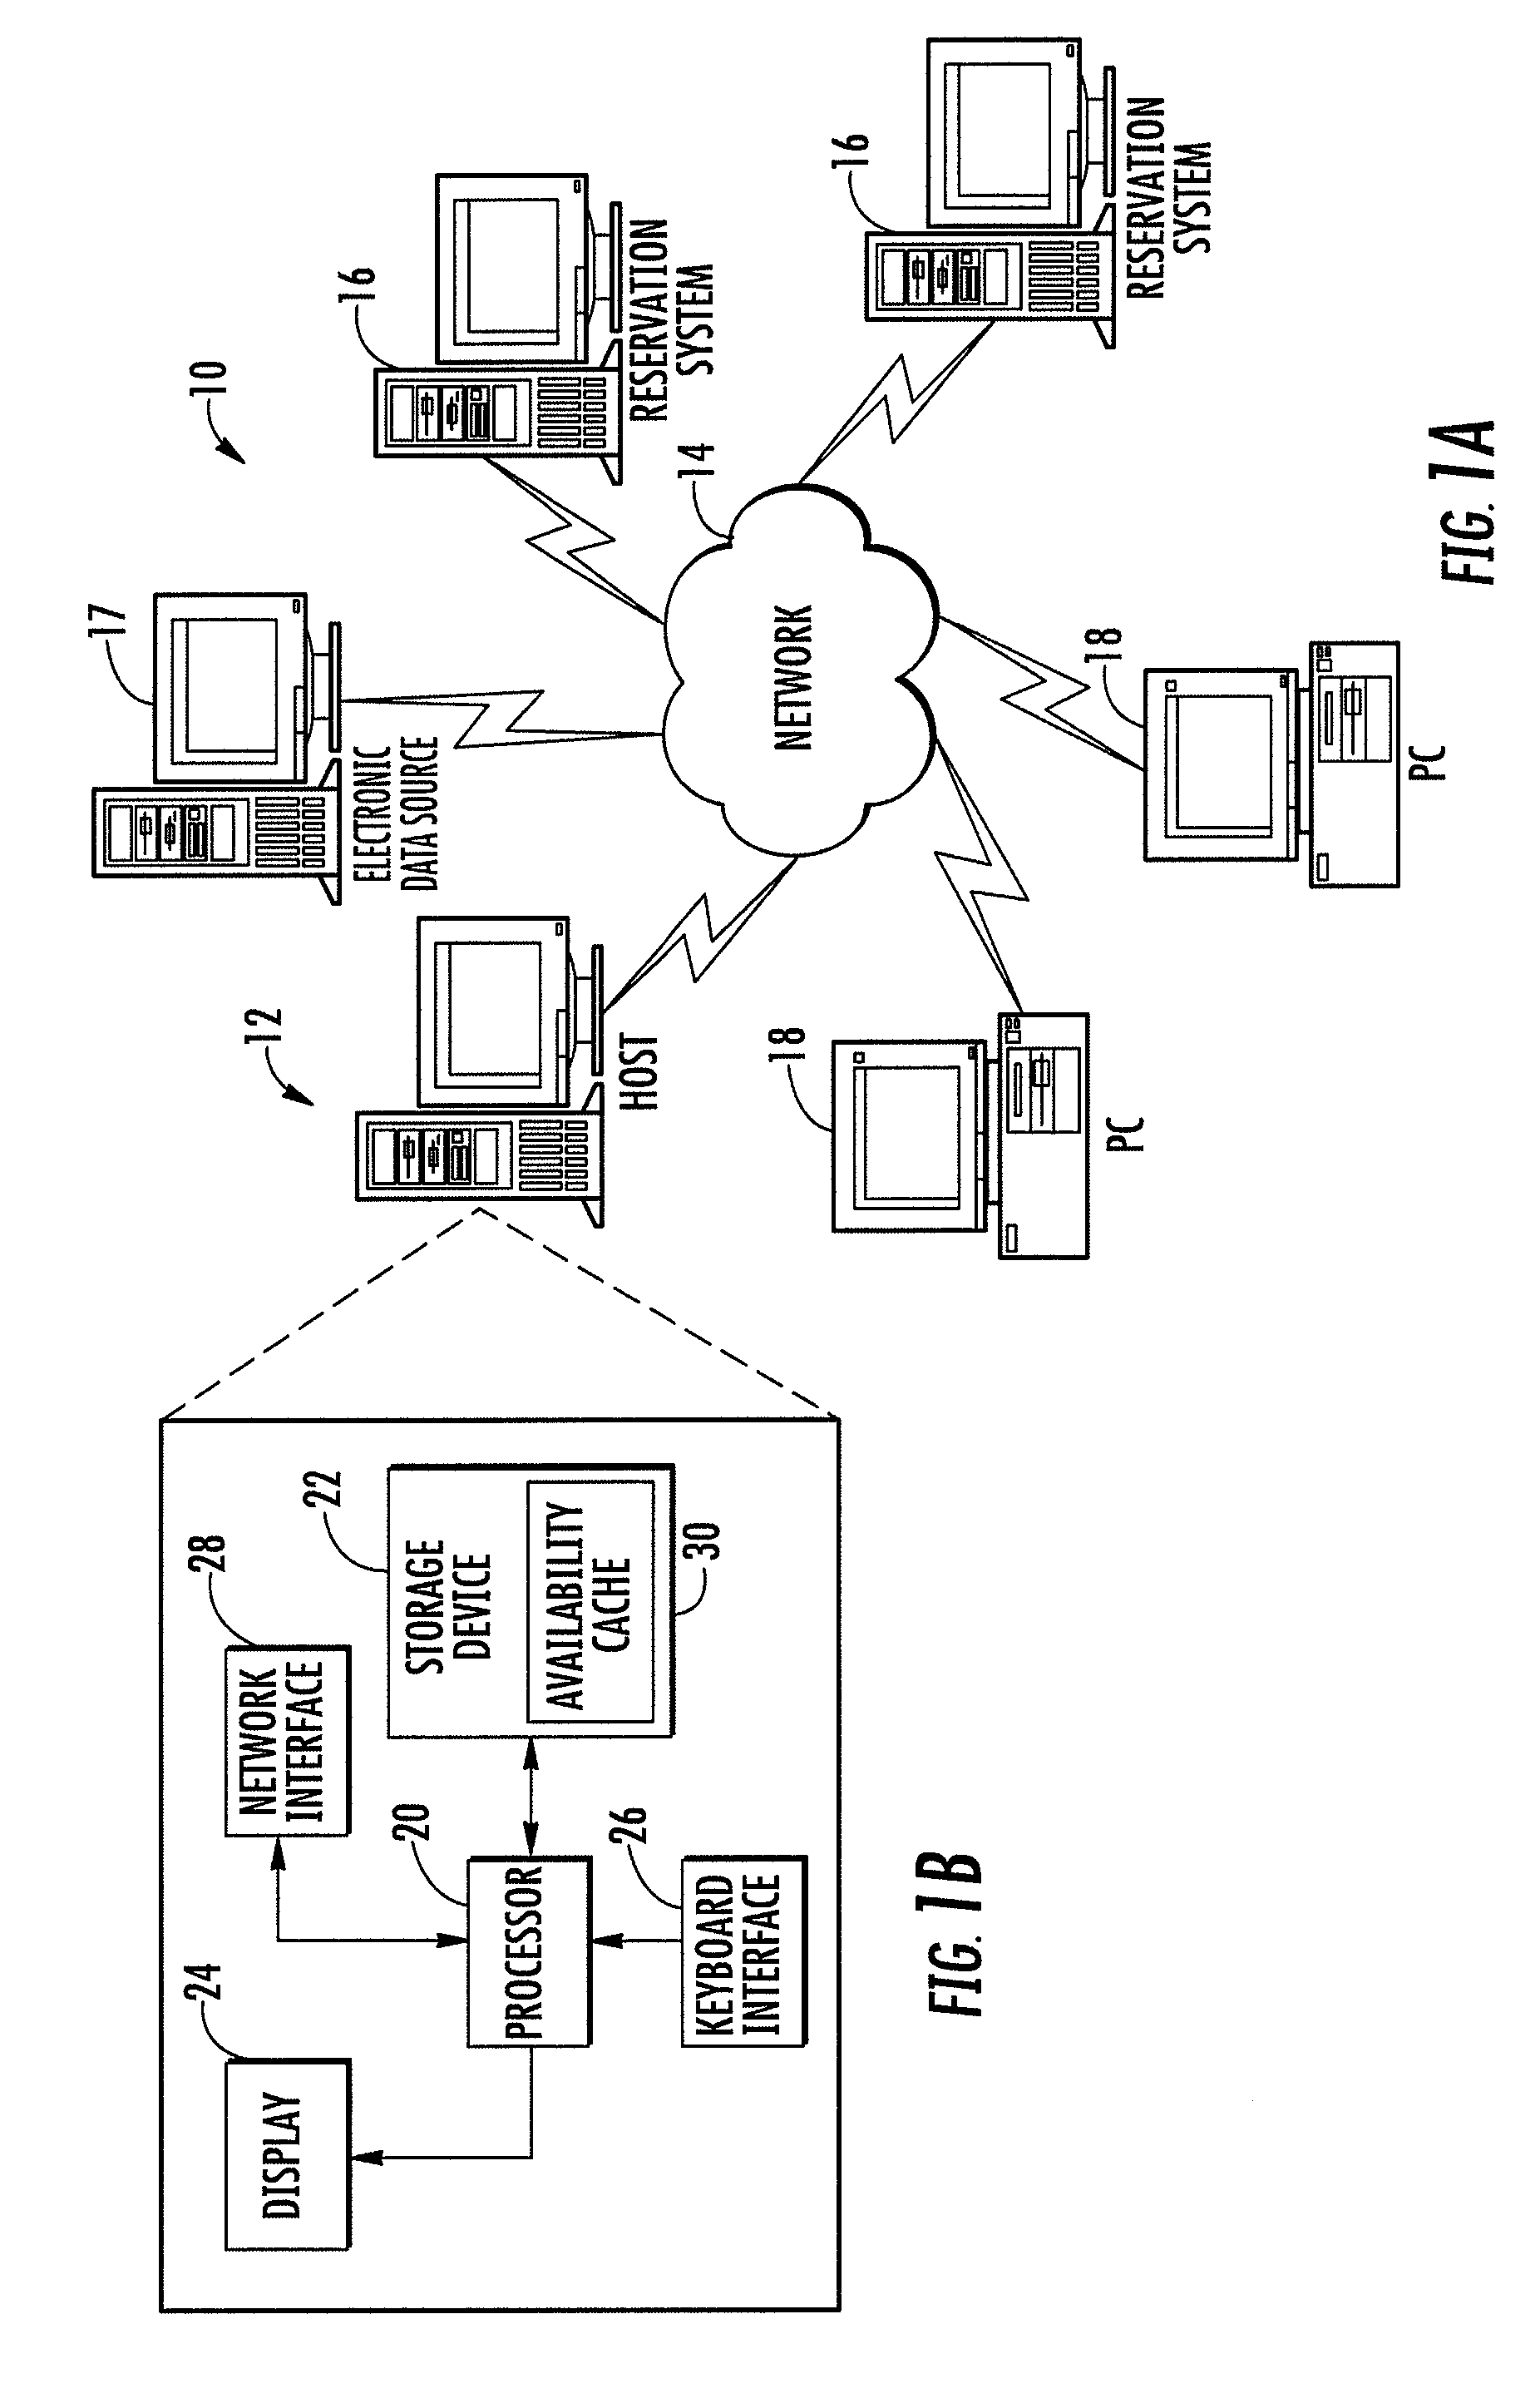 System, method, and computer program product for reducing the burden on an inventory system by assembling a suggested themed travel itinerary in response to minimal user input